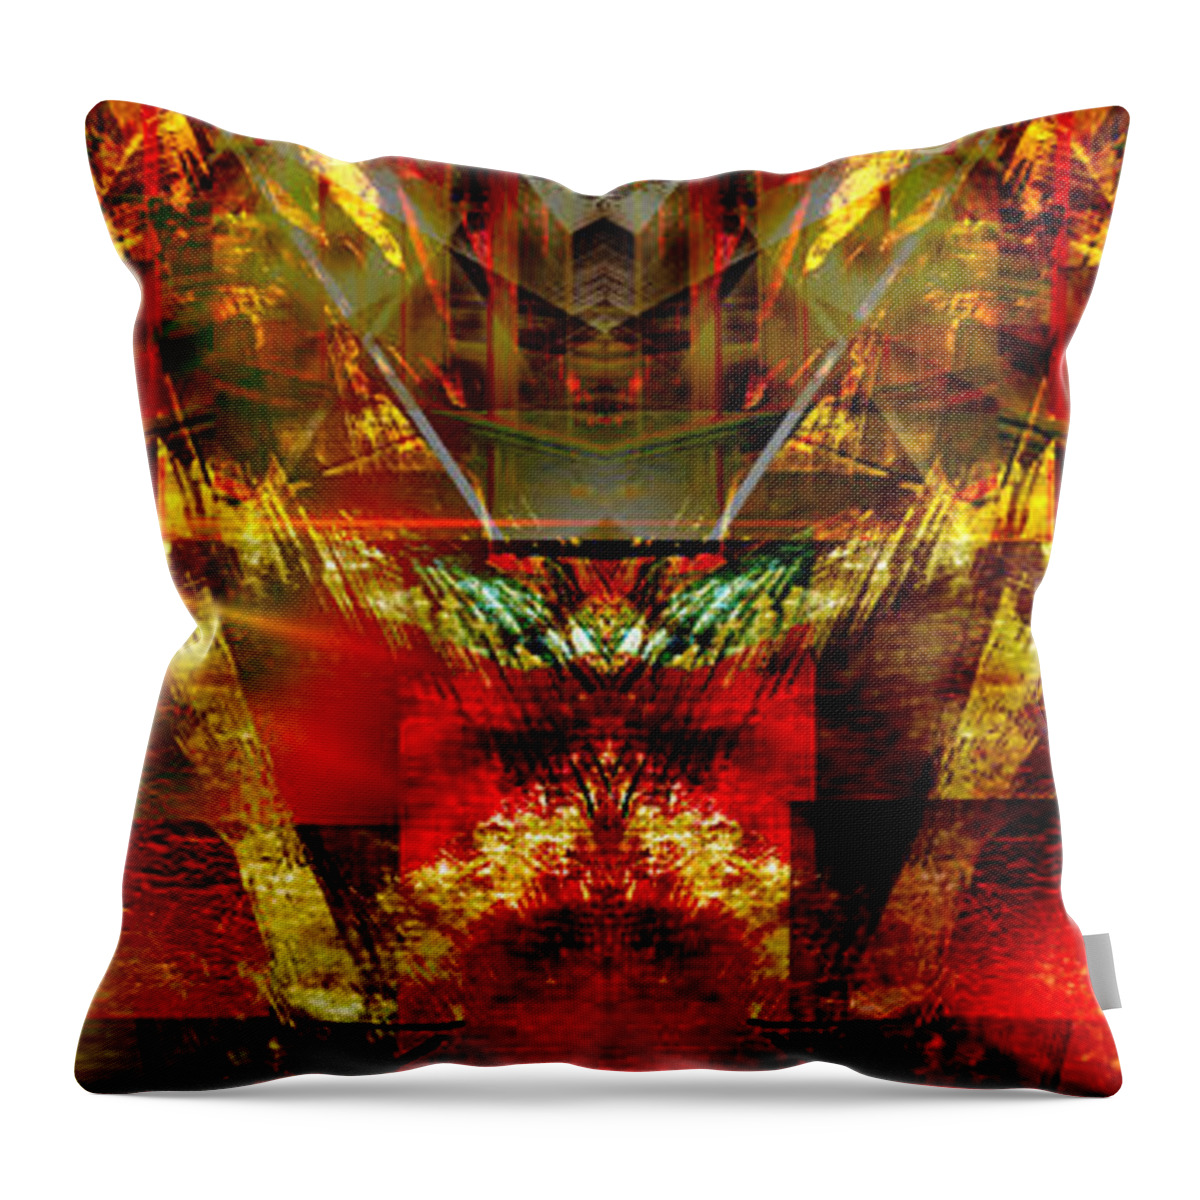 Abstract Throw Pillow featuring the digital art Sunshine.. by Art Di